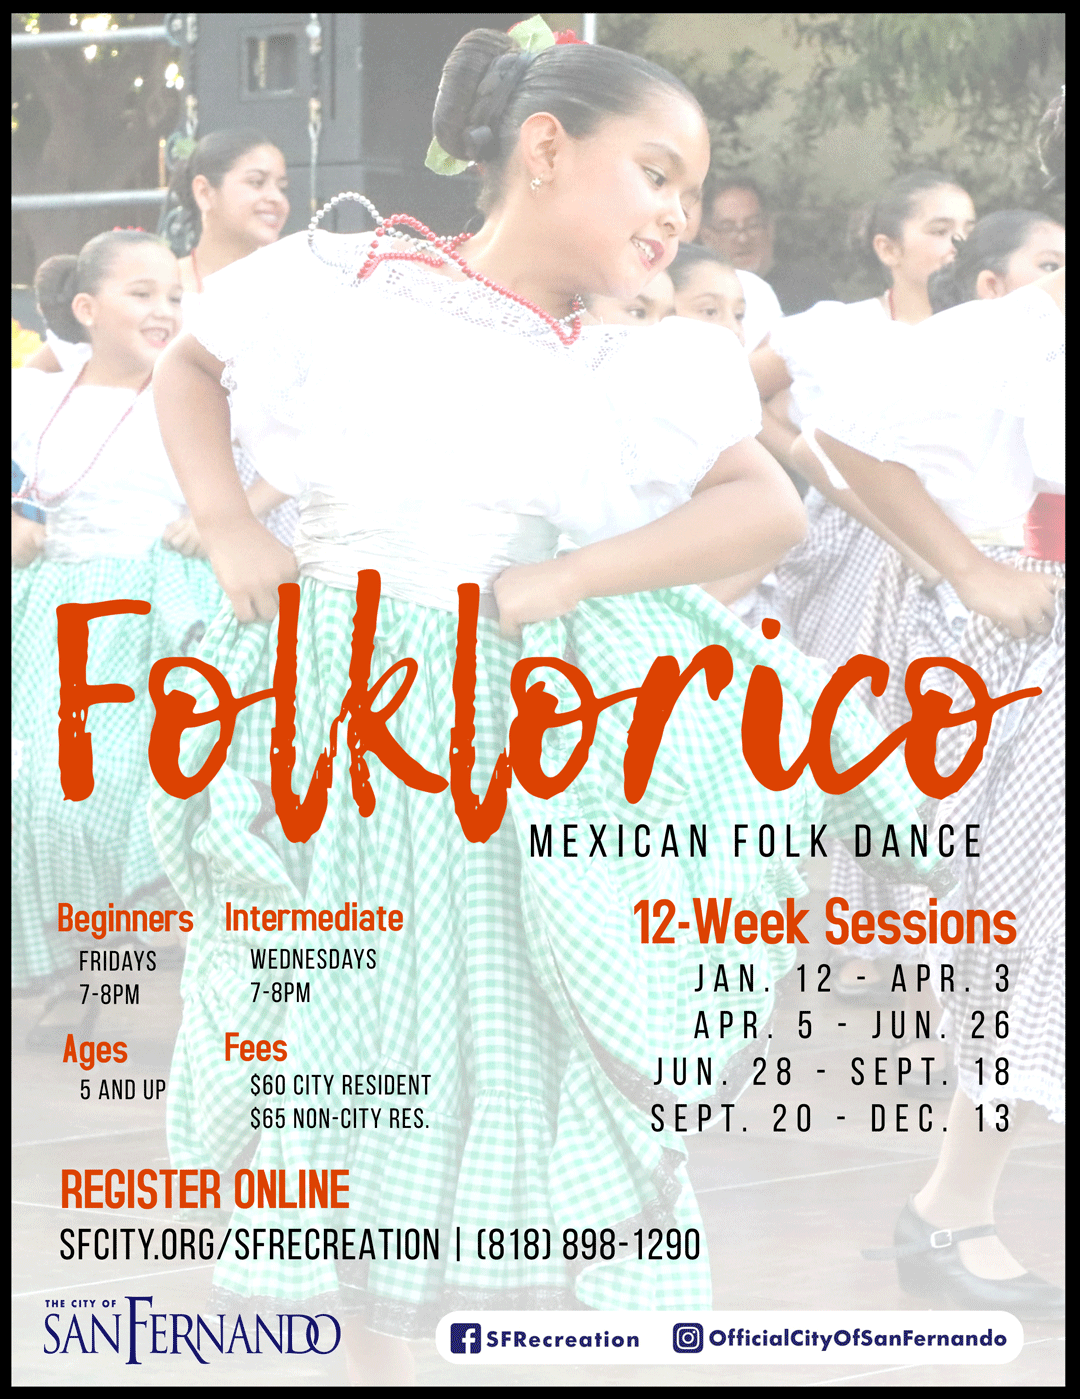 photo of young folklorico dancers; Folklorico Mexican Folk Dance